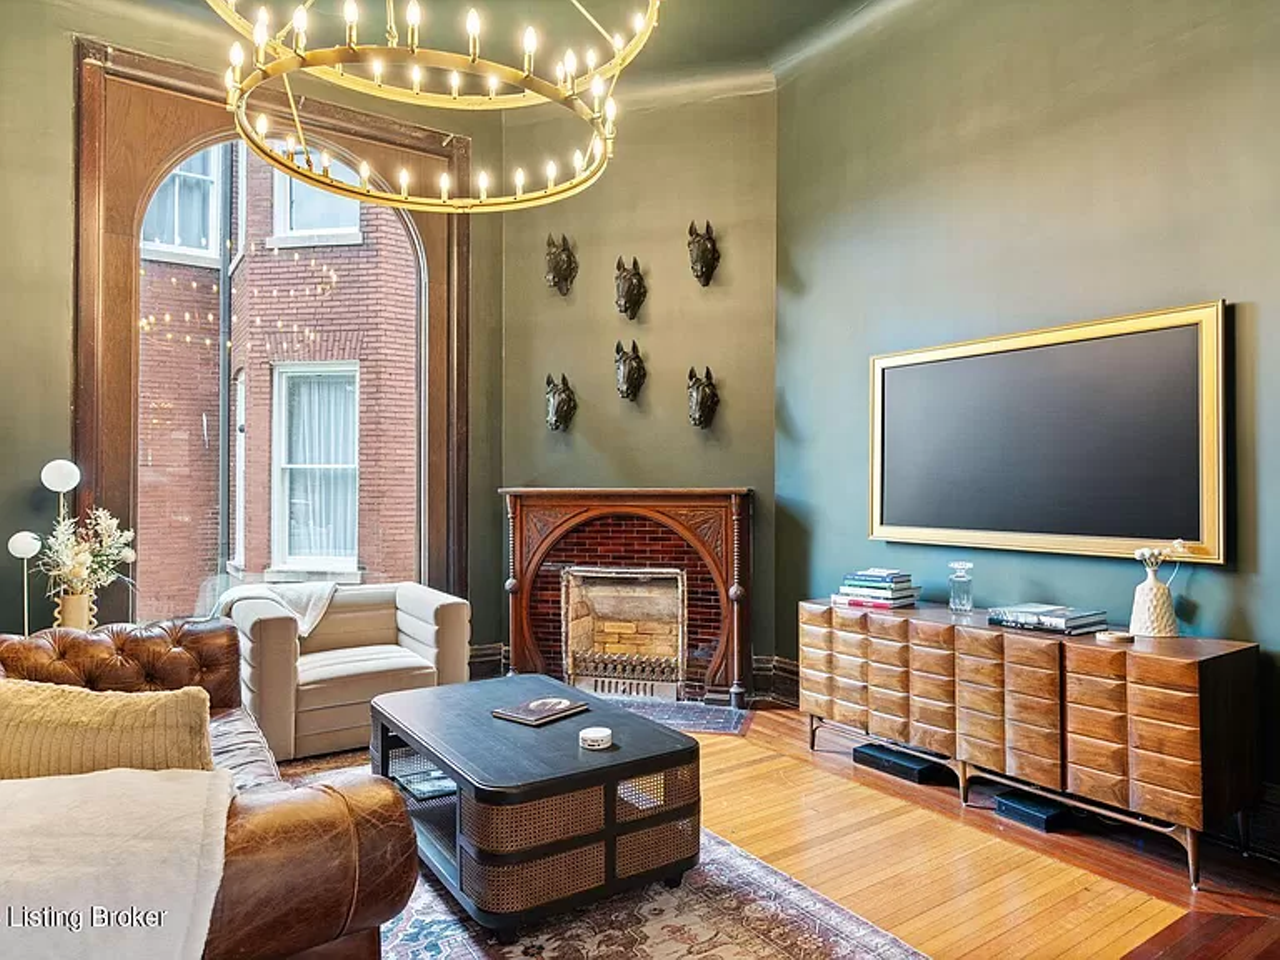 This Victorian Mansion Renovation In Old Louisville Is Like Nothing You've Seen Before